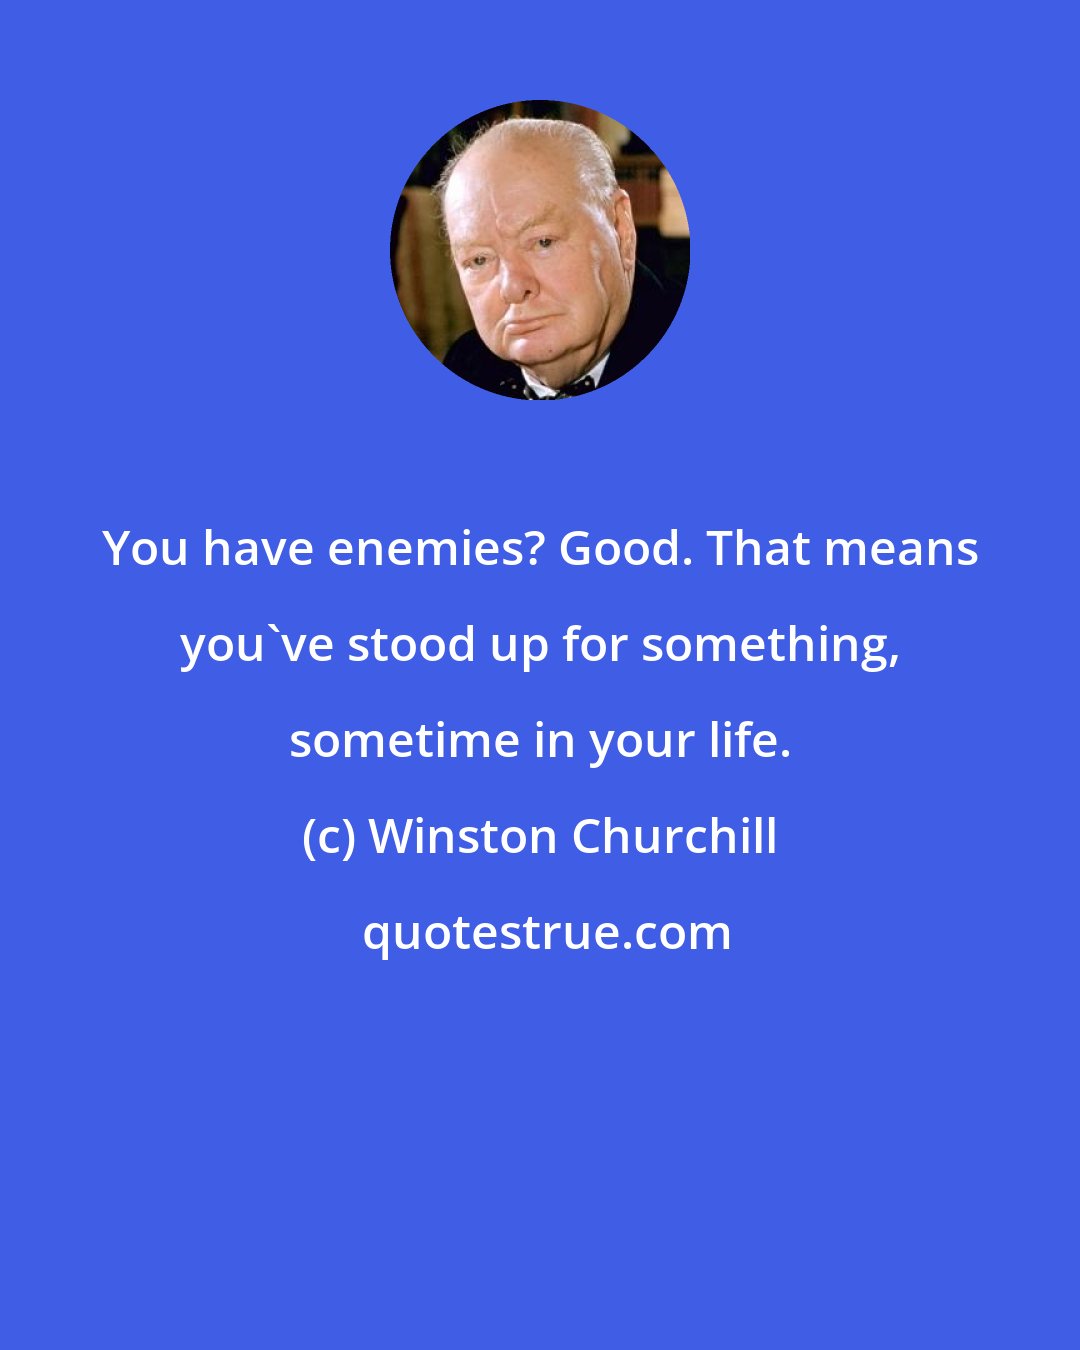 Winston Churchill: You have enemies? Good. That means you've stood up for something, sometime in your life.